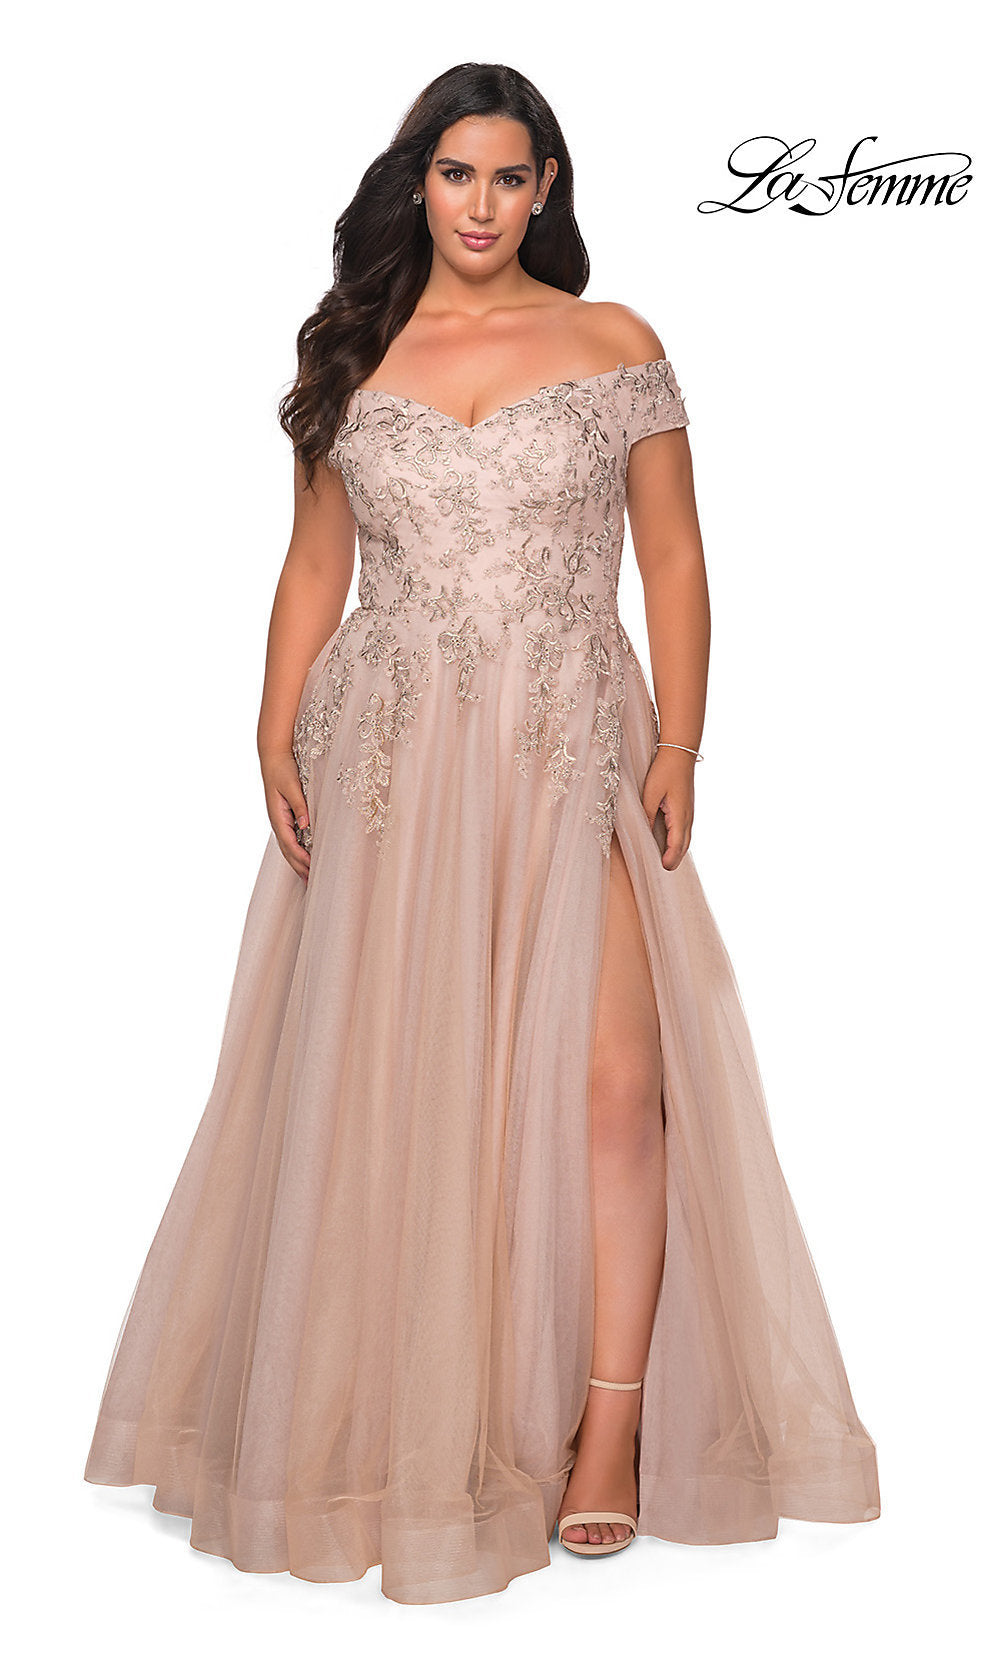 Plus size formal dresses clothing sizes wedding dress evening gown  formal wear ball gown a line  Plus Size Prom Dresses  A Line Ball gown  Clothing sizes